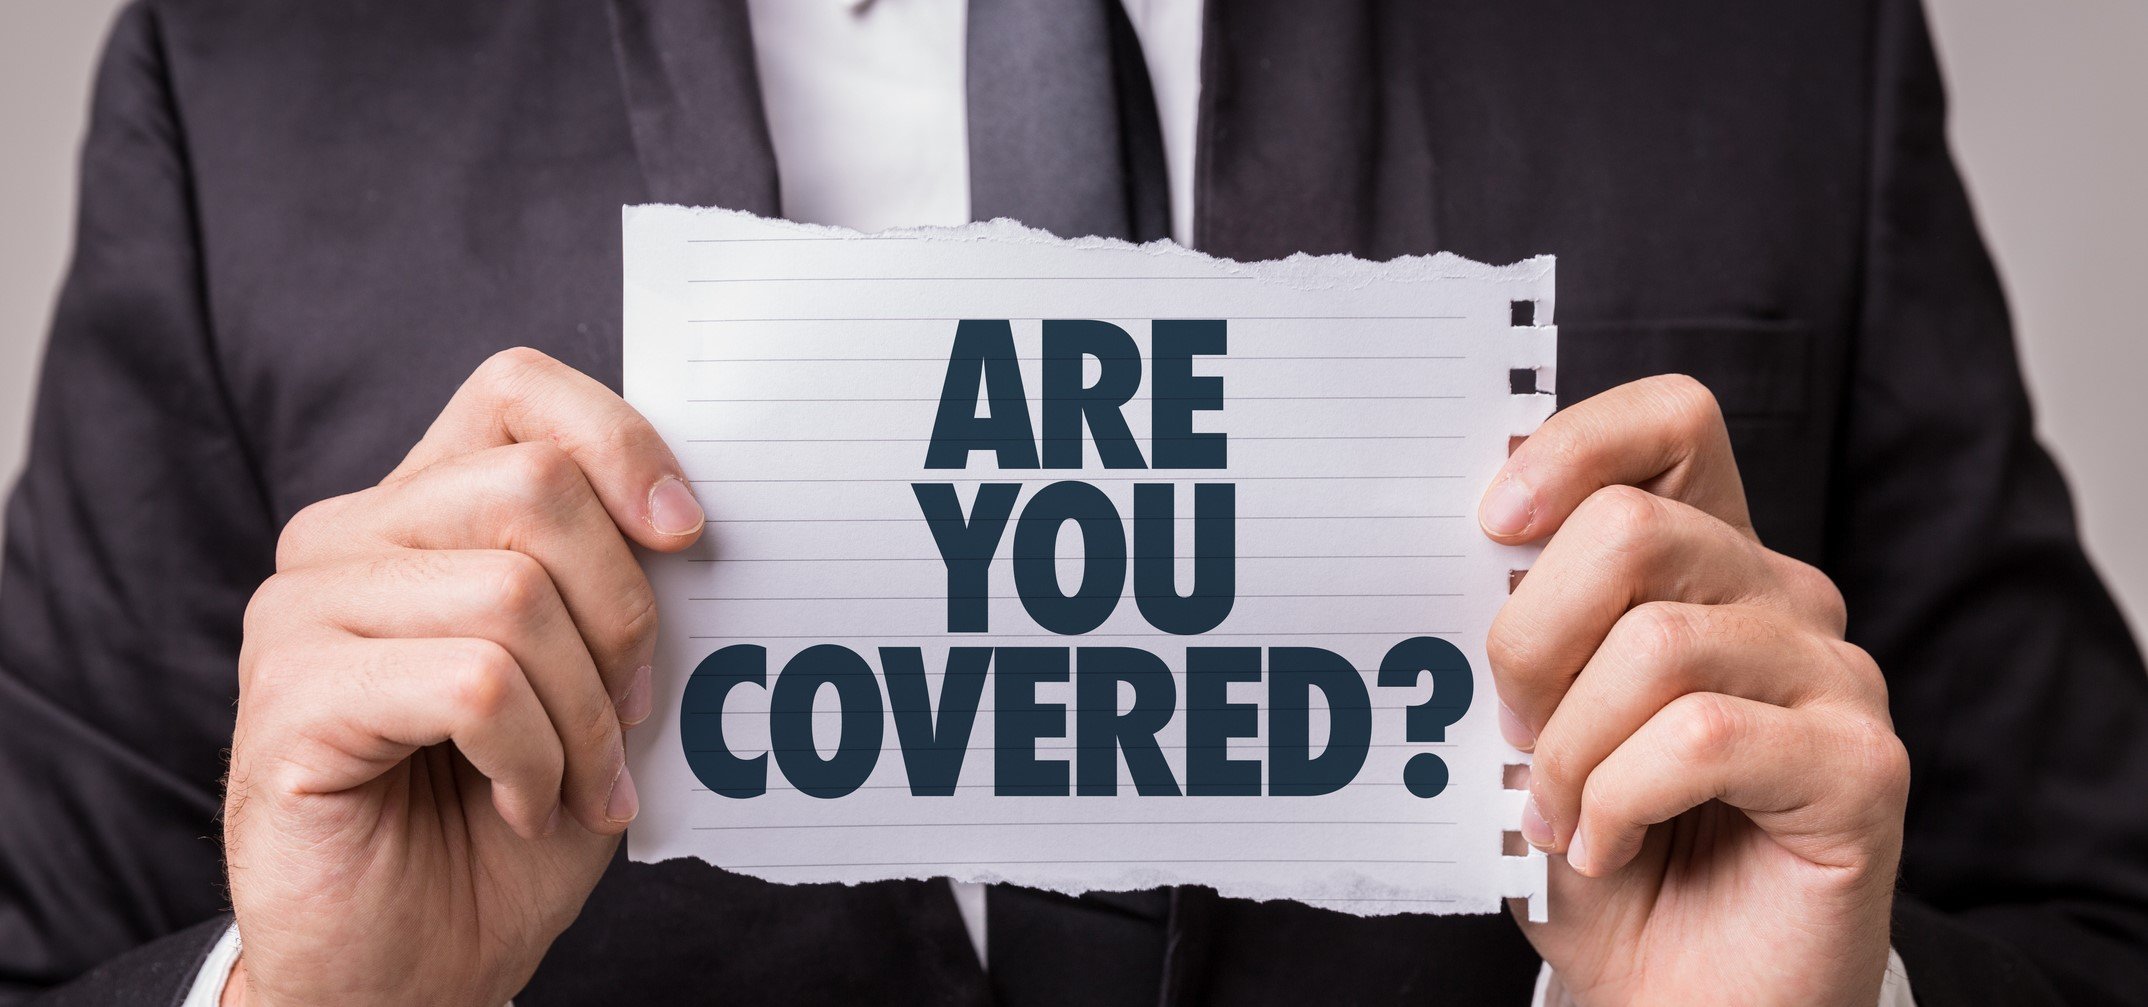 What's covered on my dental plan, coverage, dental coverage, PPO plans, HMO plans